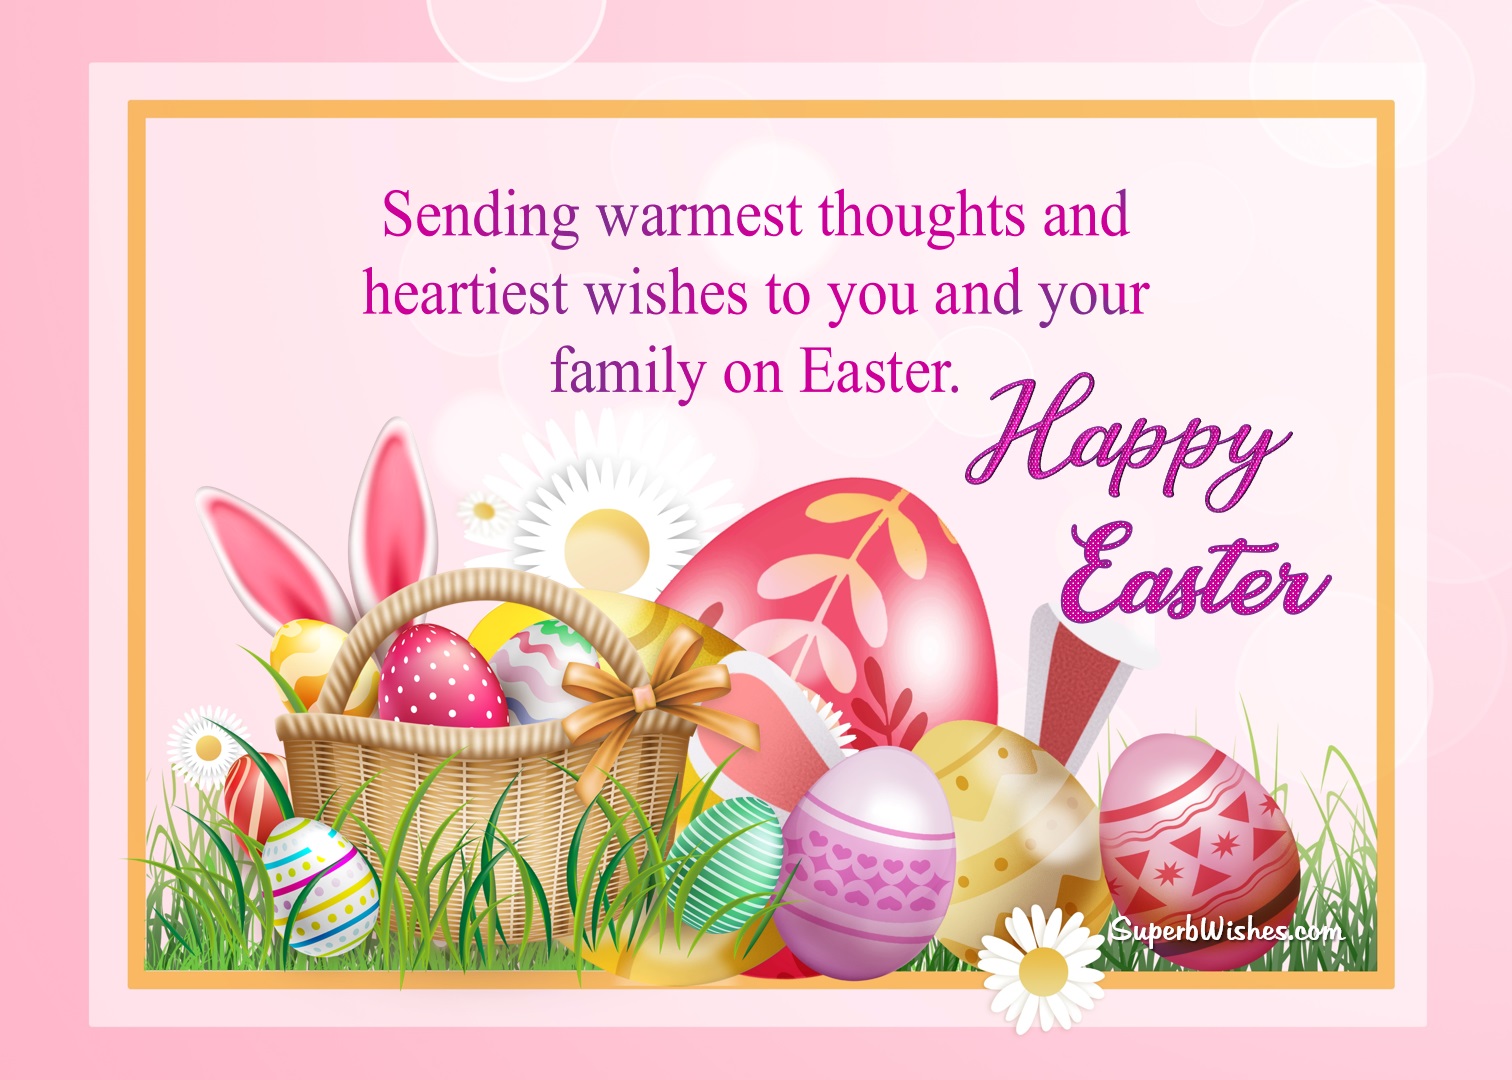 Religious Easter Images Free by SuperbWishes